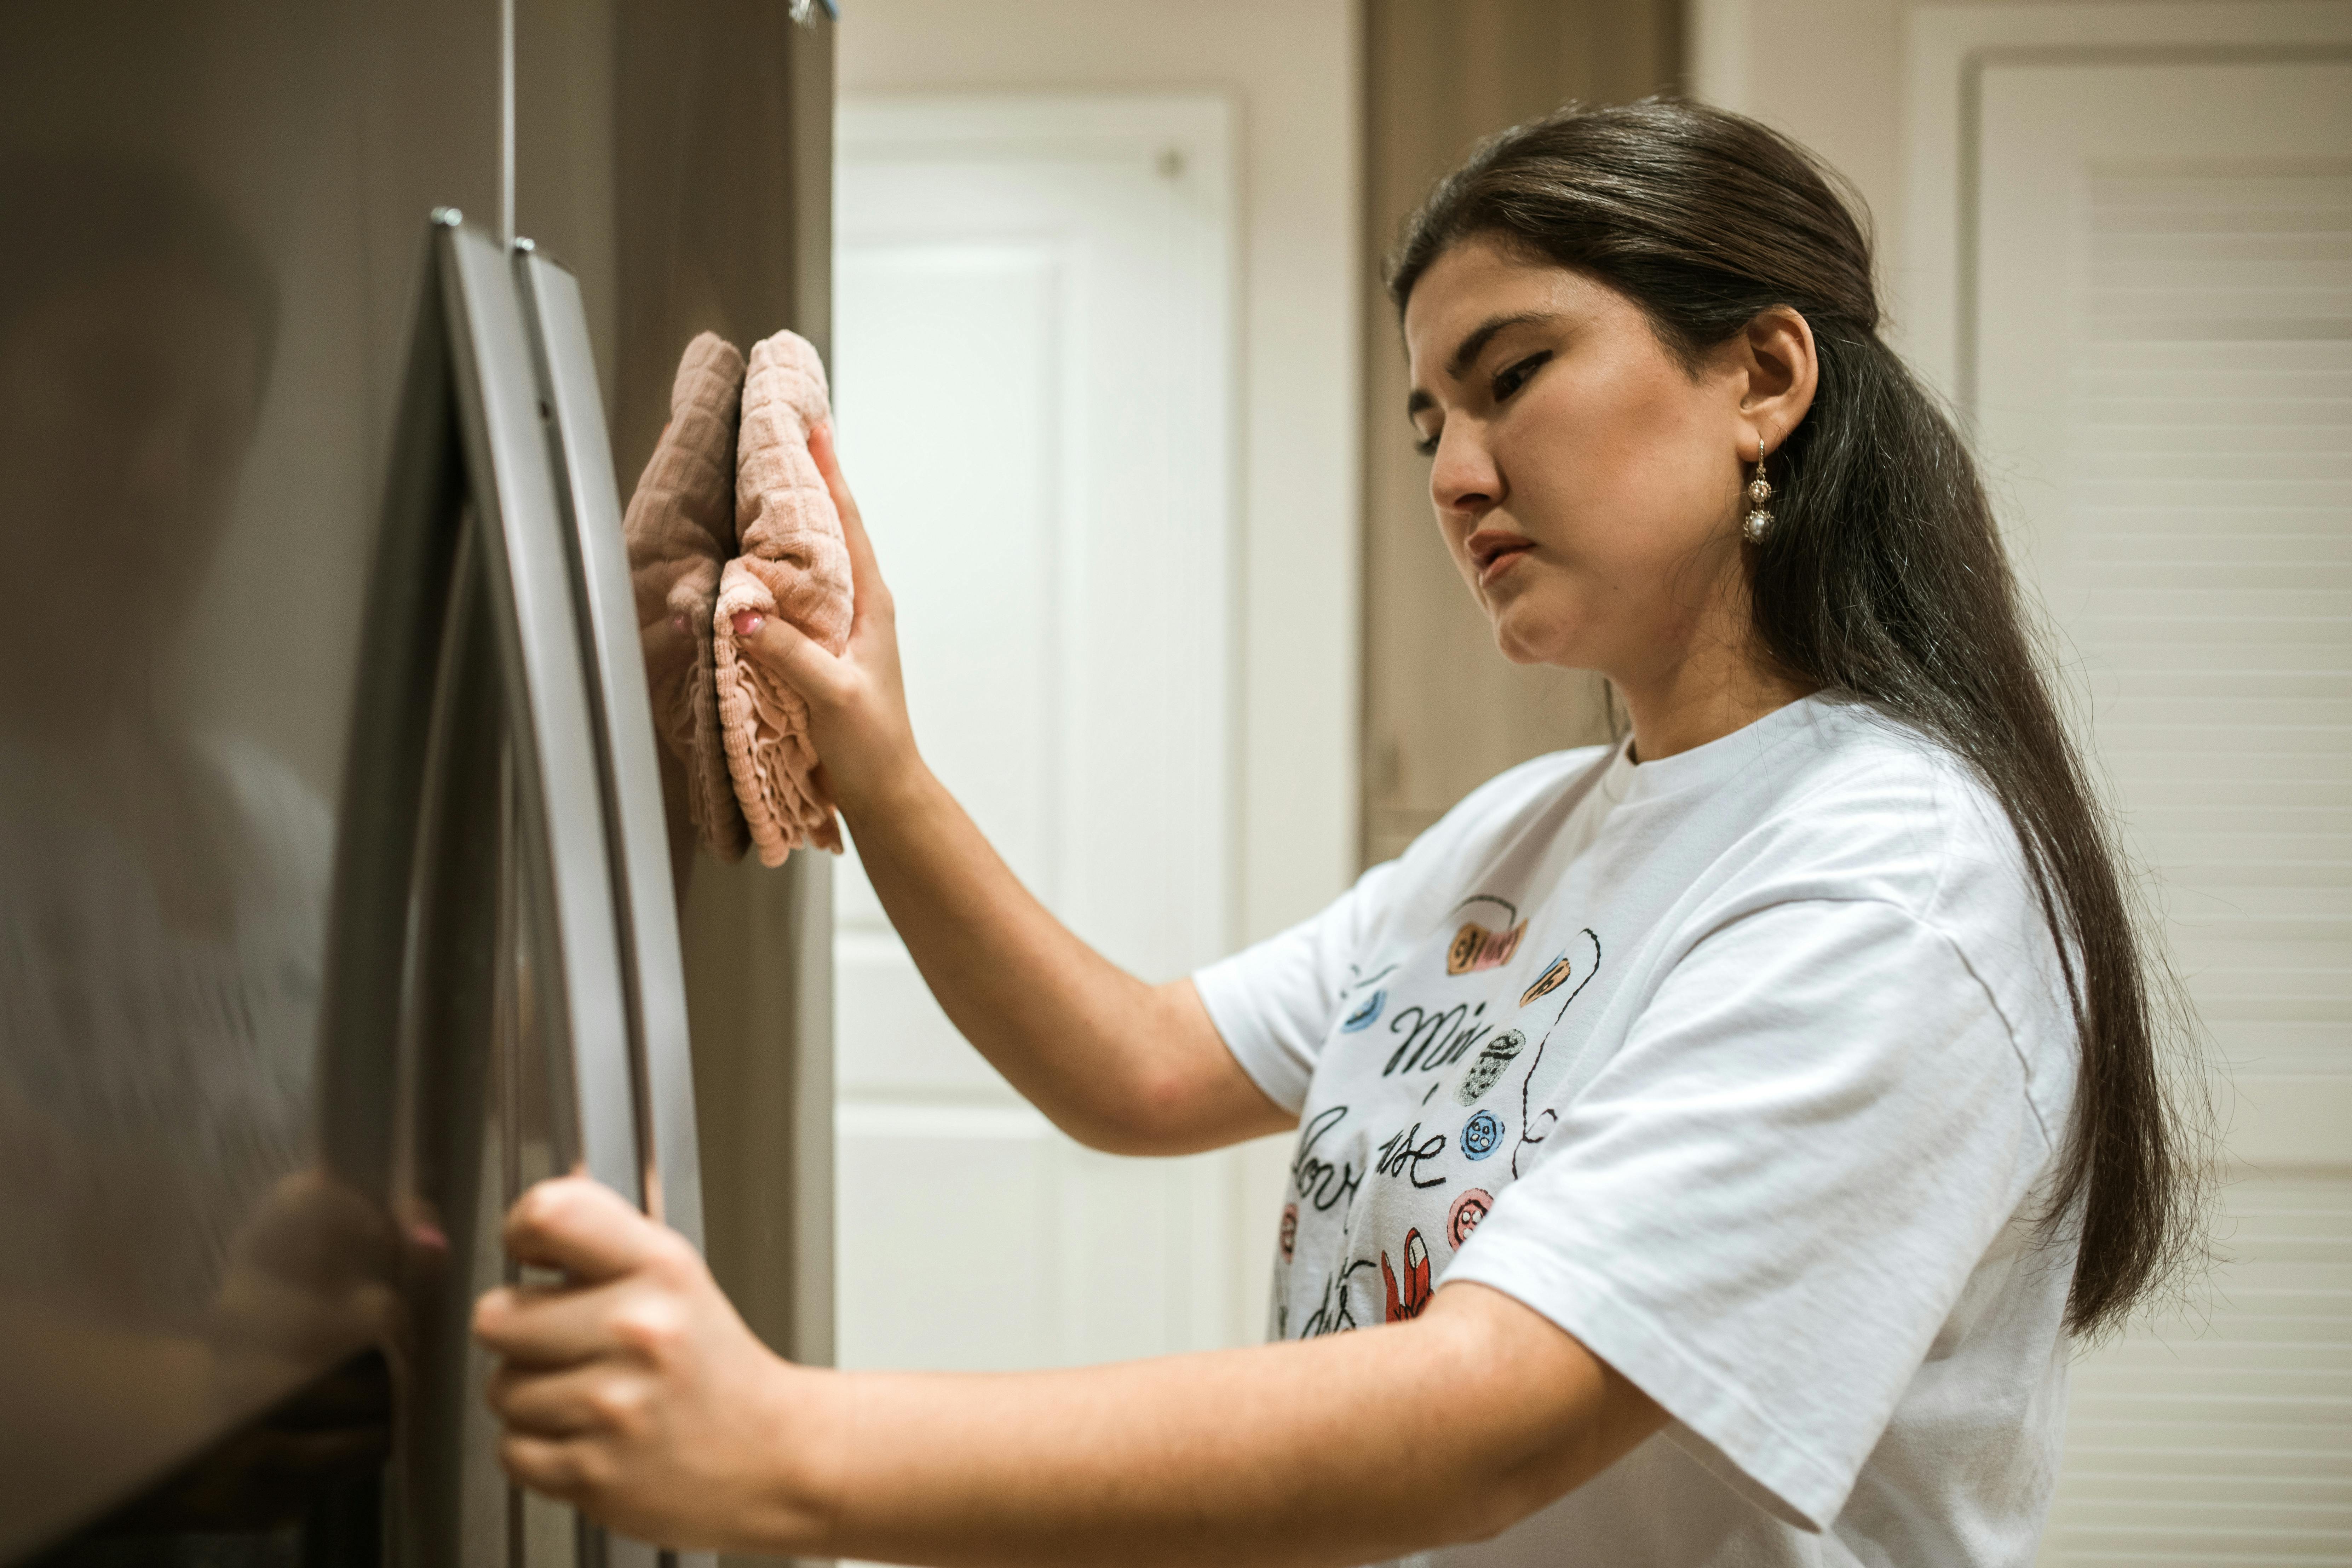 A woman cleaning a refrigerator. | Source: Pexels